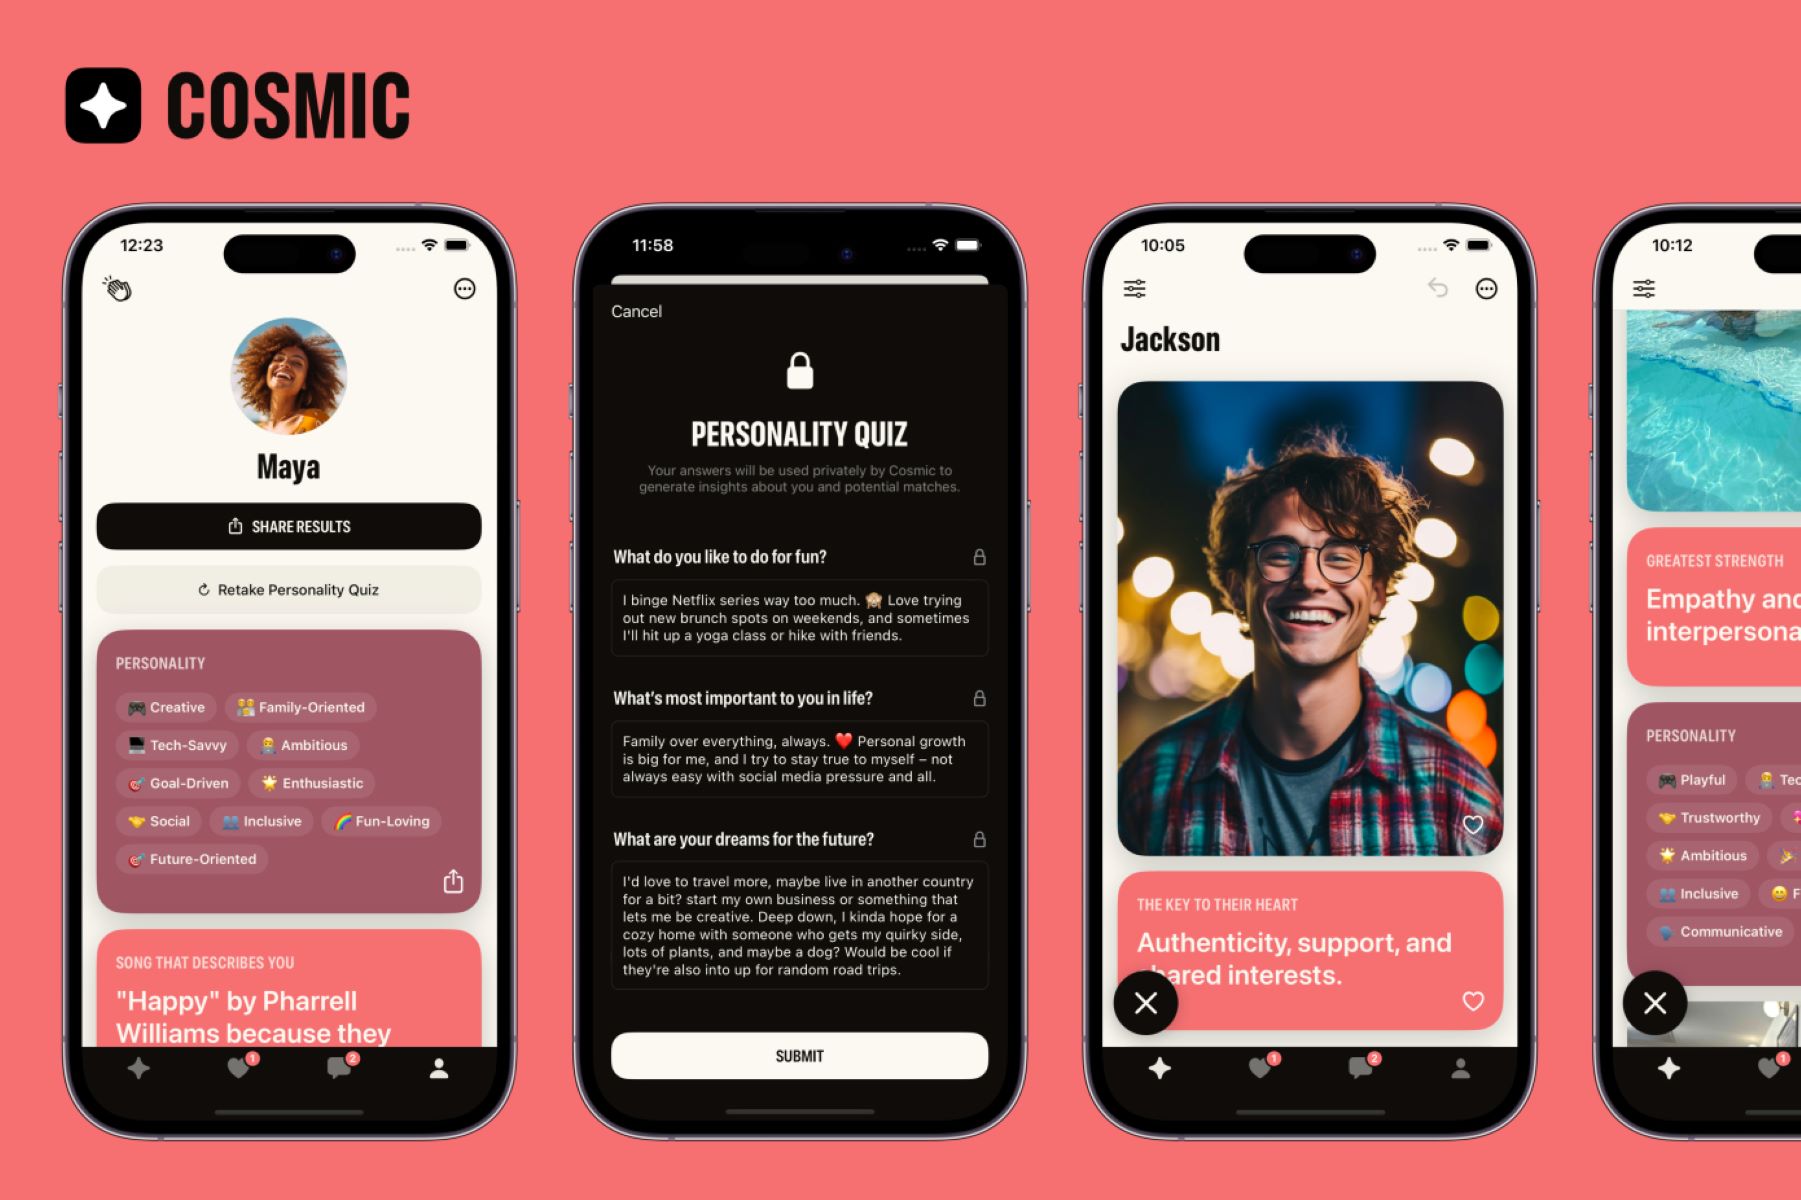 Revolutionizing Online Dating: Cosmic Dating App Utilizes Personality Quizzes To Create Unique User Profiles